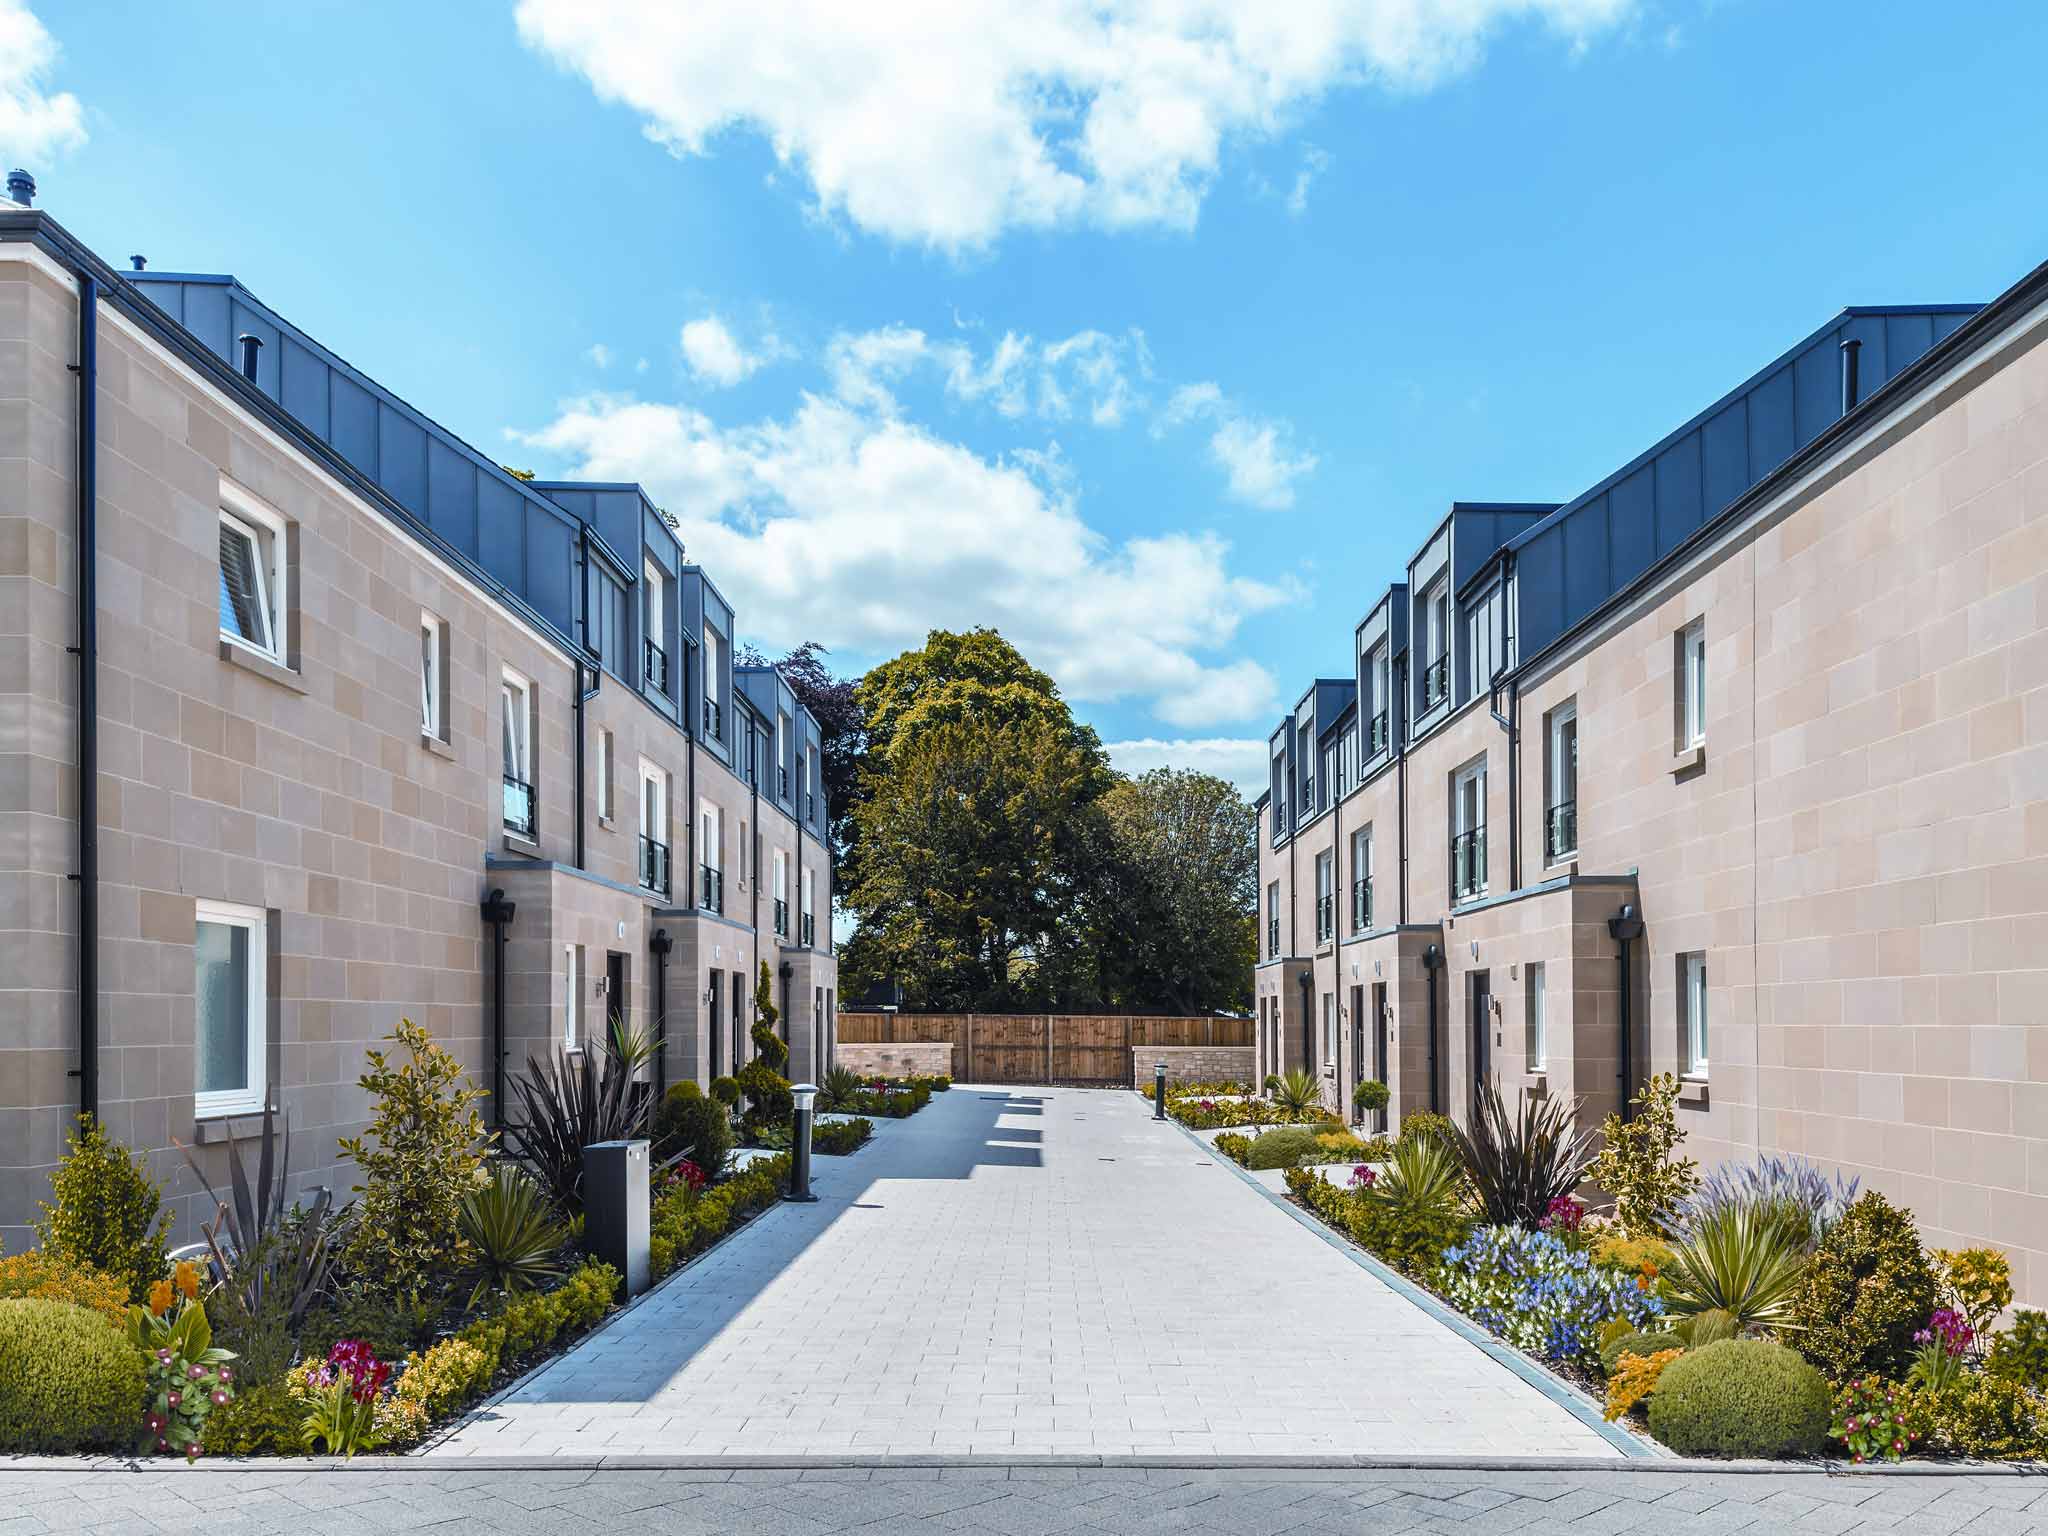 Drummond and Abercrombie Mews homes at Trinity Park